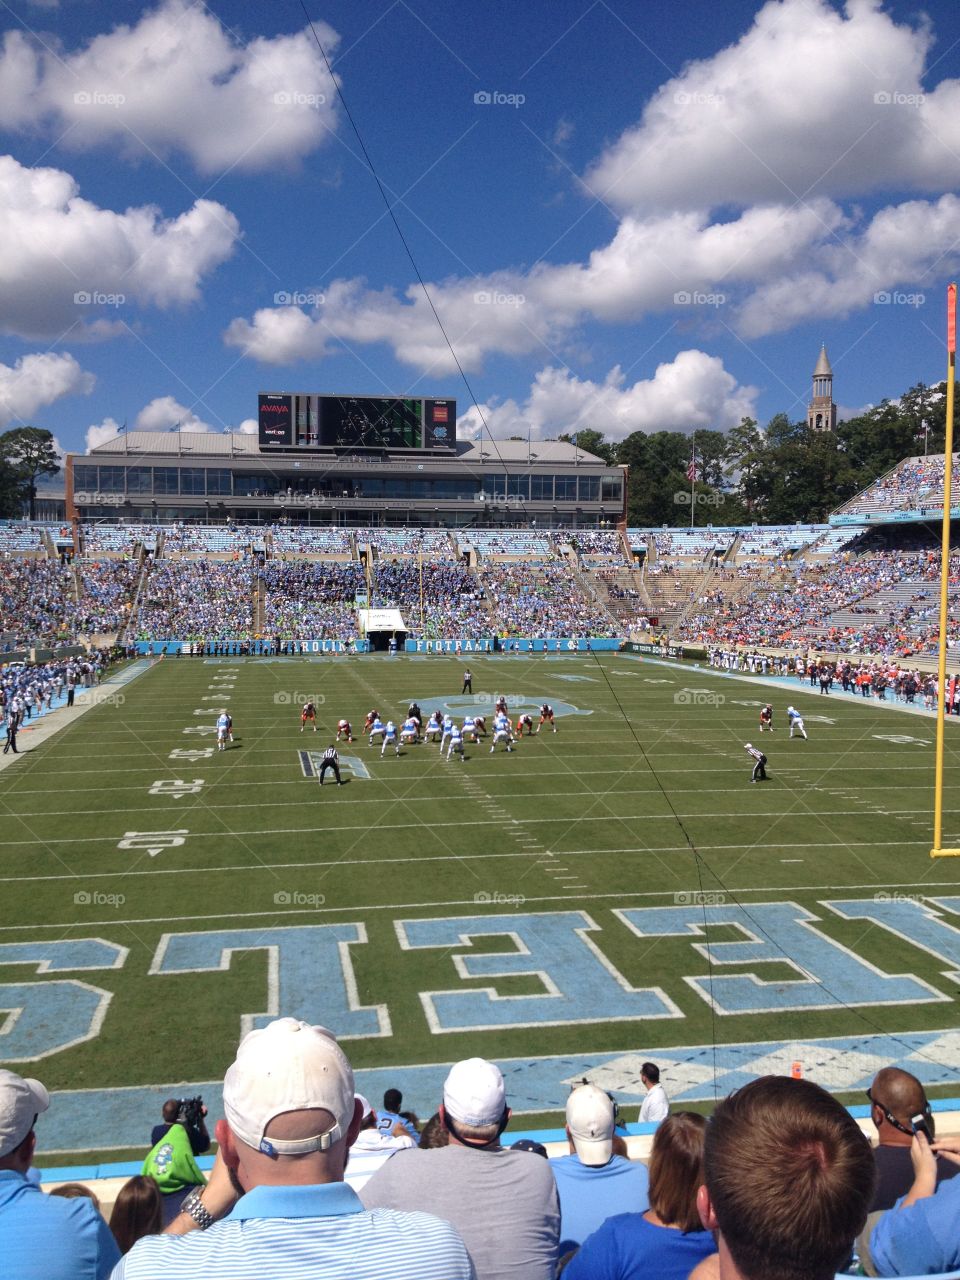 UNC-Chapel Hill football . This was a picture taken at the UNC-CH vs  Illinois football game on September 19, 2015